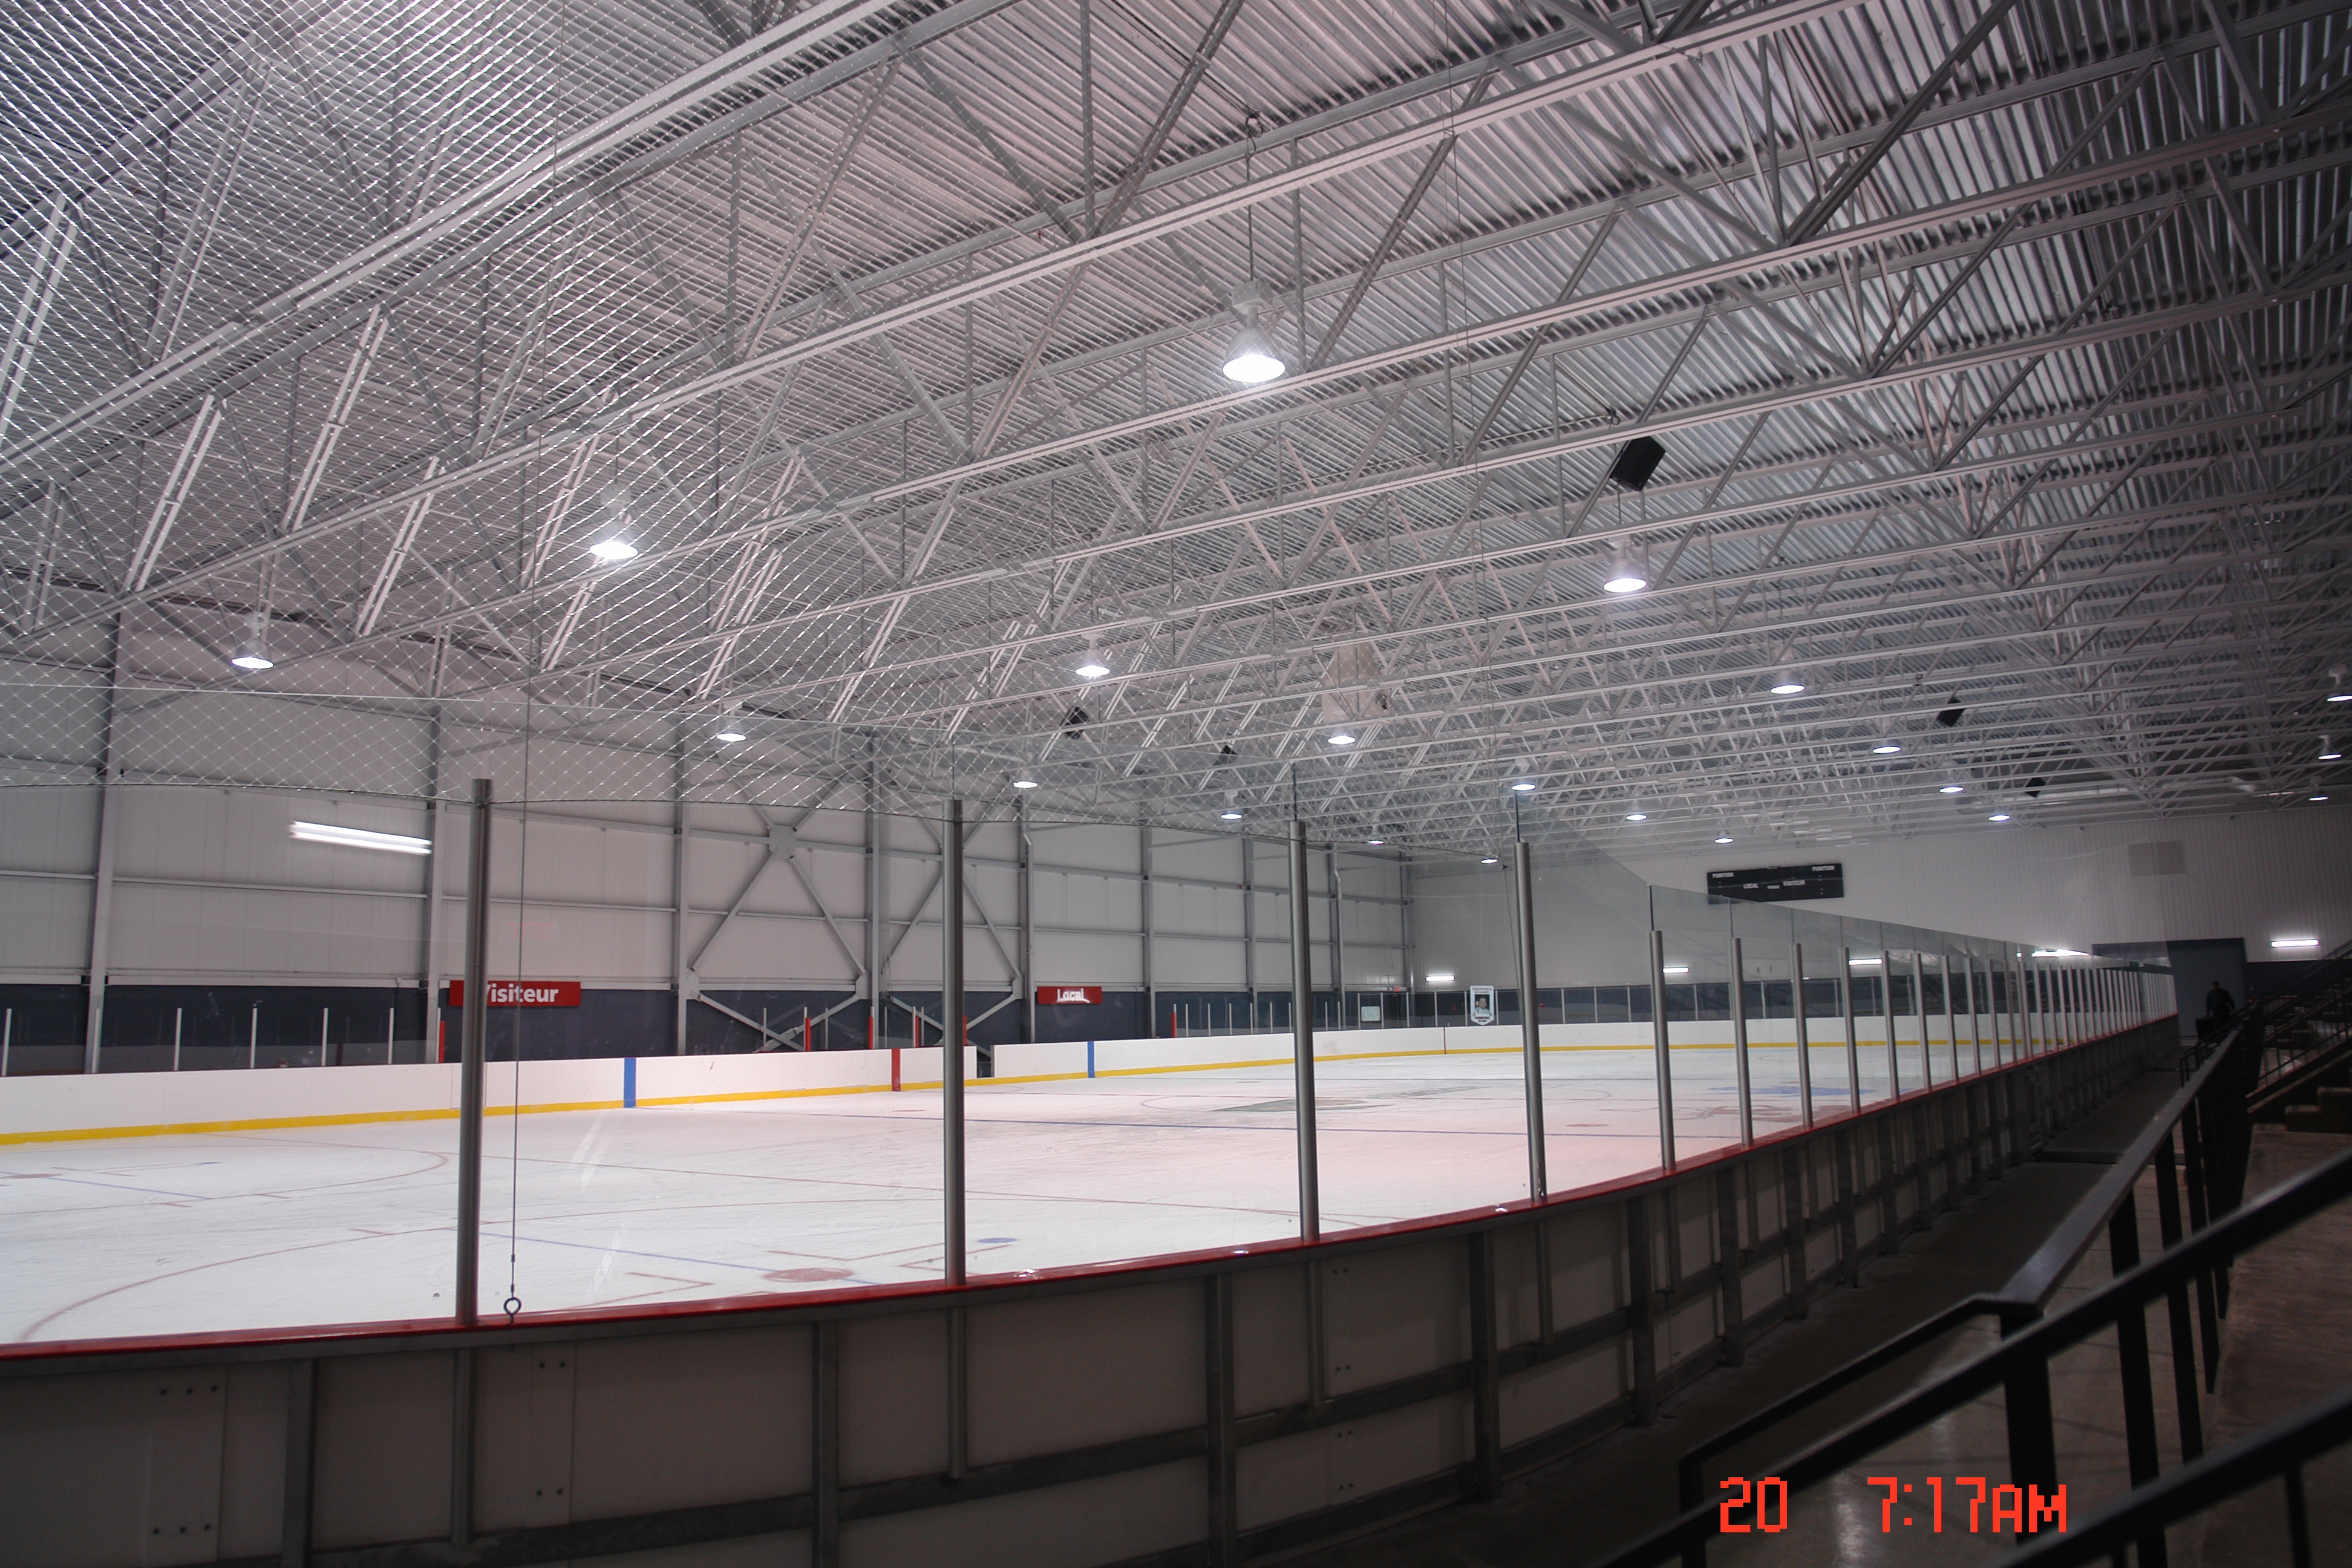 LO/MIT IRCCS Spray-applied to underside of steel roof decking and trusses of Montreal Canadiens' ice hockey practice arena, the Complexe Sportif Bell.